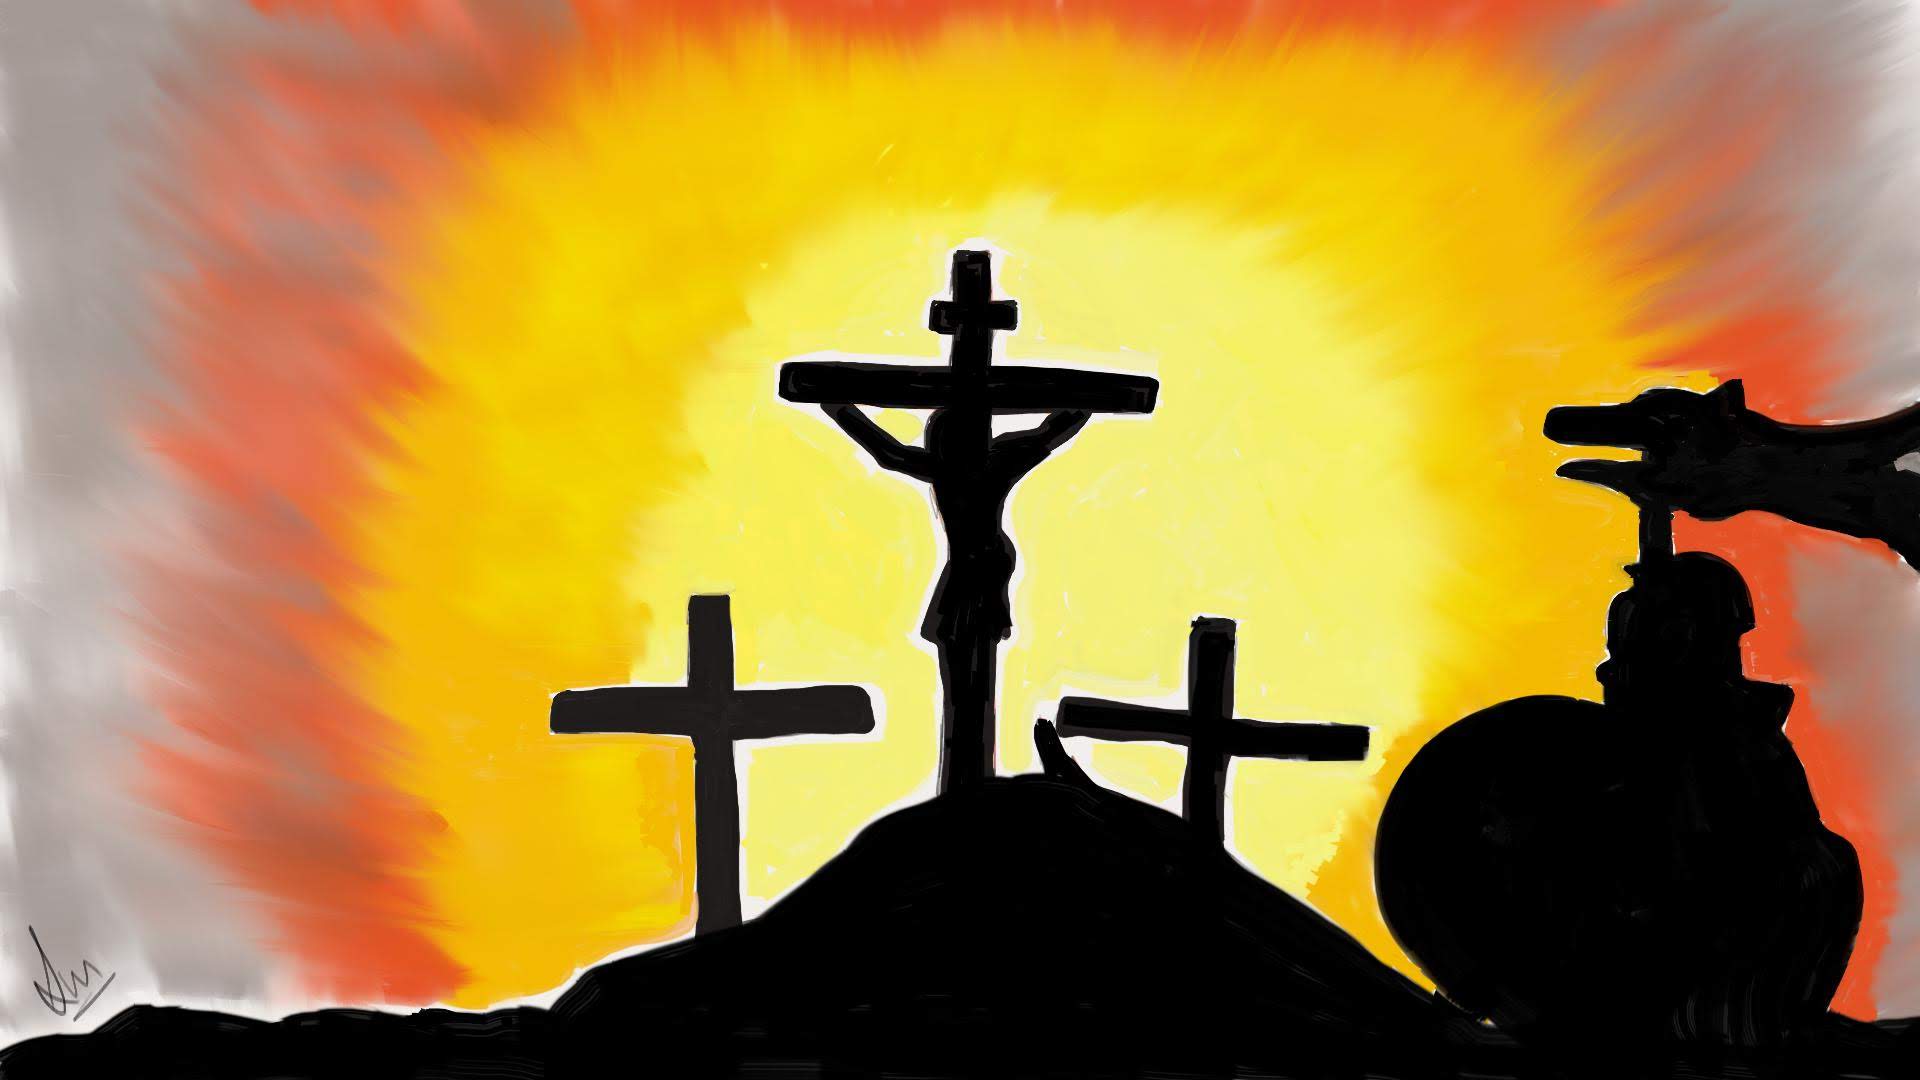 Our Lord and Savior, Jesus Christ hung on the Cross - Digitial Painting by Shaalyn Monteir